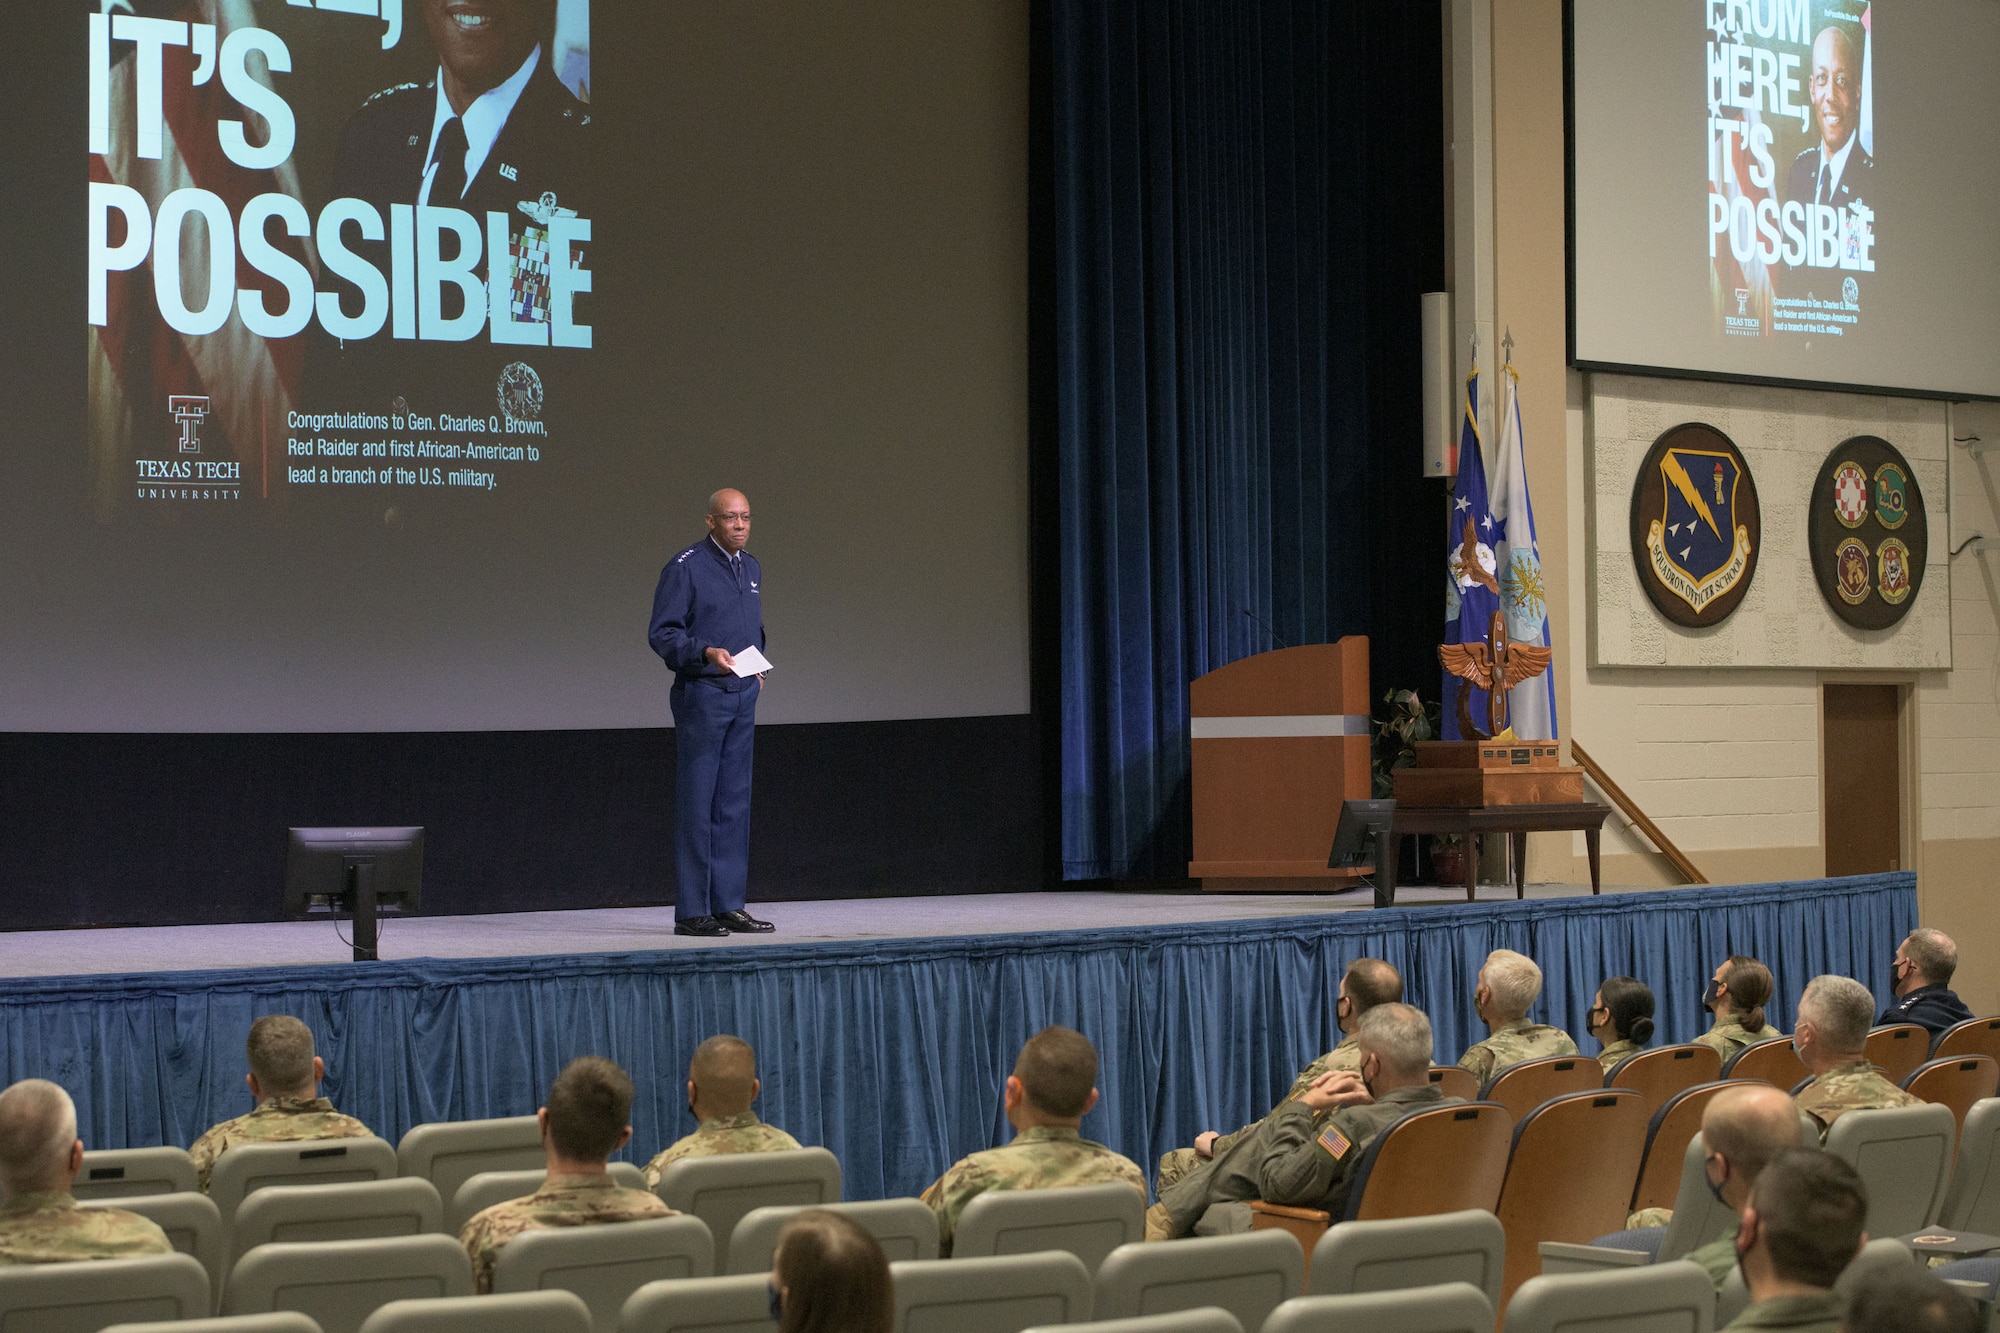 Maxwell AFB,  Ala. - Air Force Chief of Staff Gen. CQ Brown, Jr. addresses attendees of the AFROTC Commanders Symposium. Brown took the time to share his experience at AFROTC Detachment 820 at Texas Tech University and his perspective on leadership. (U.S. Air Force photo by Trey Ward)